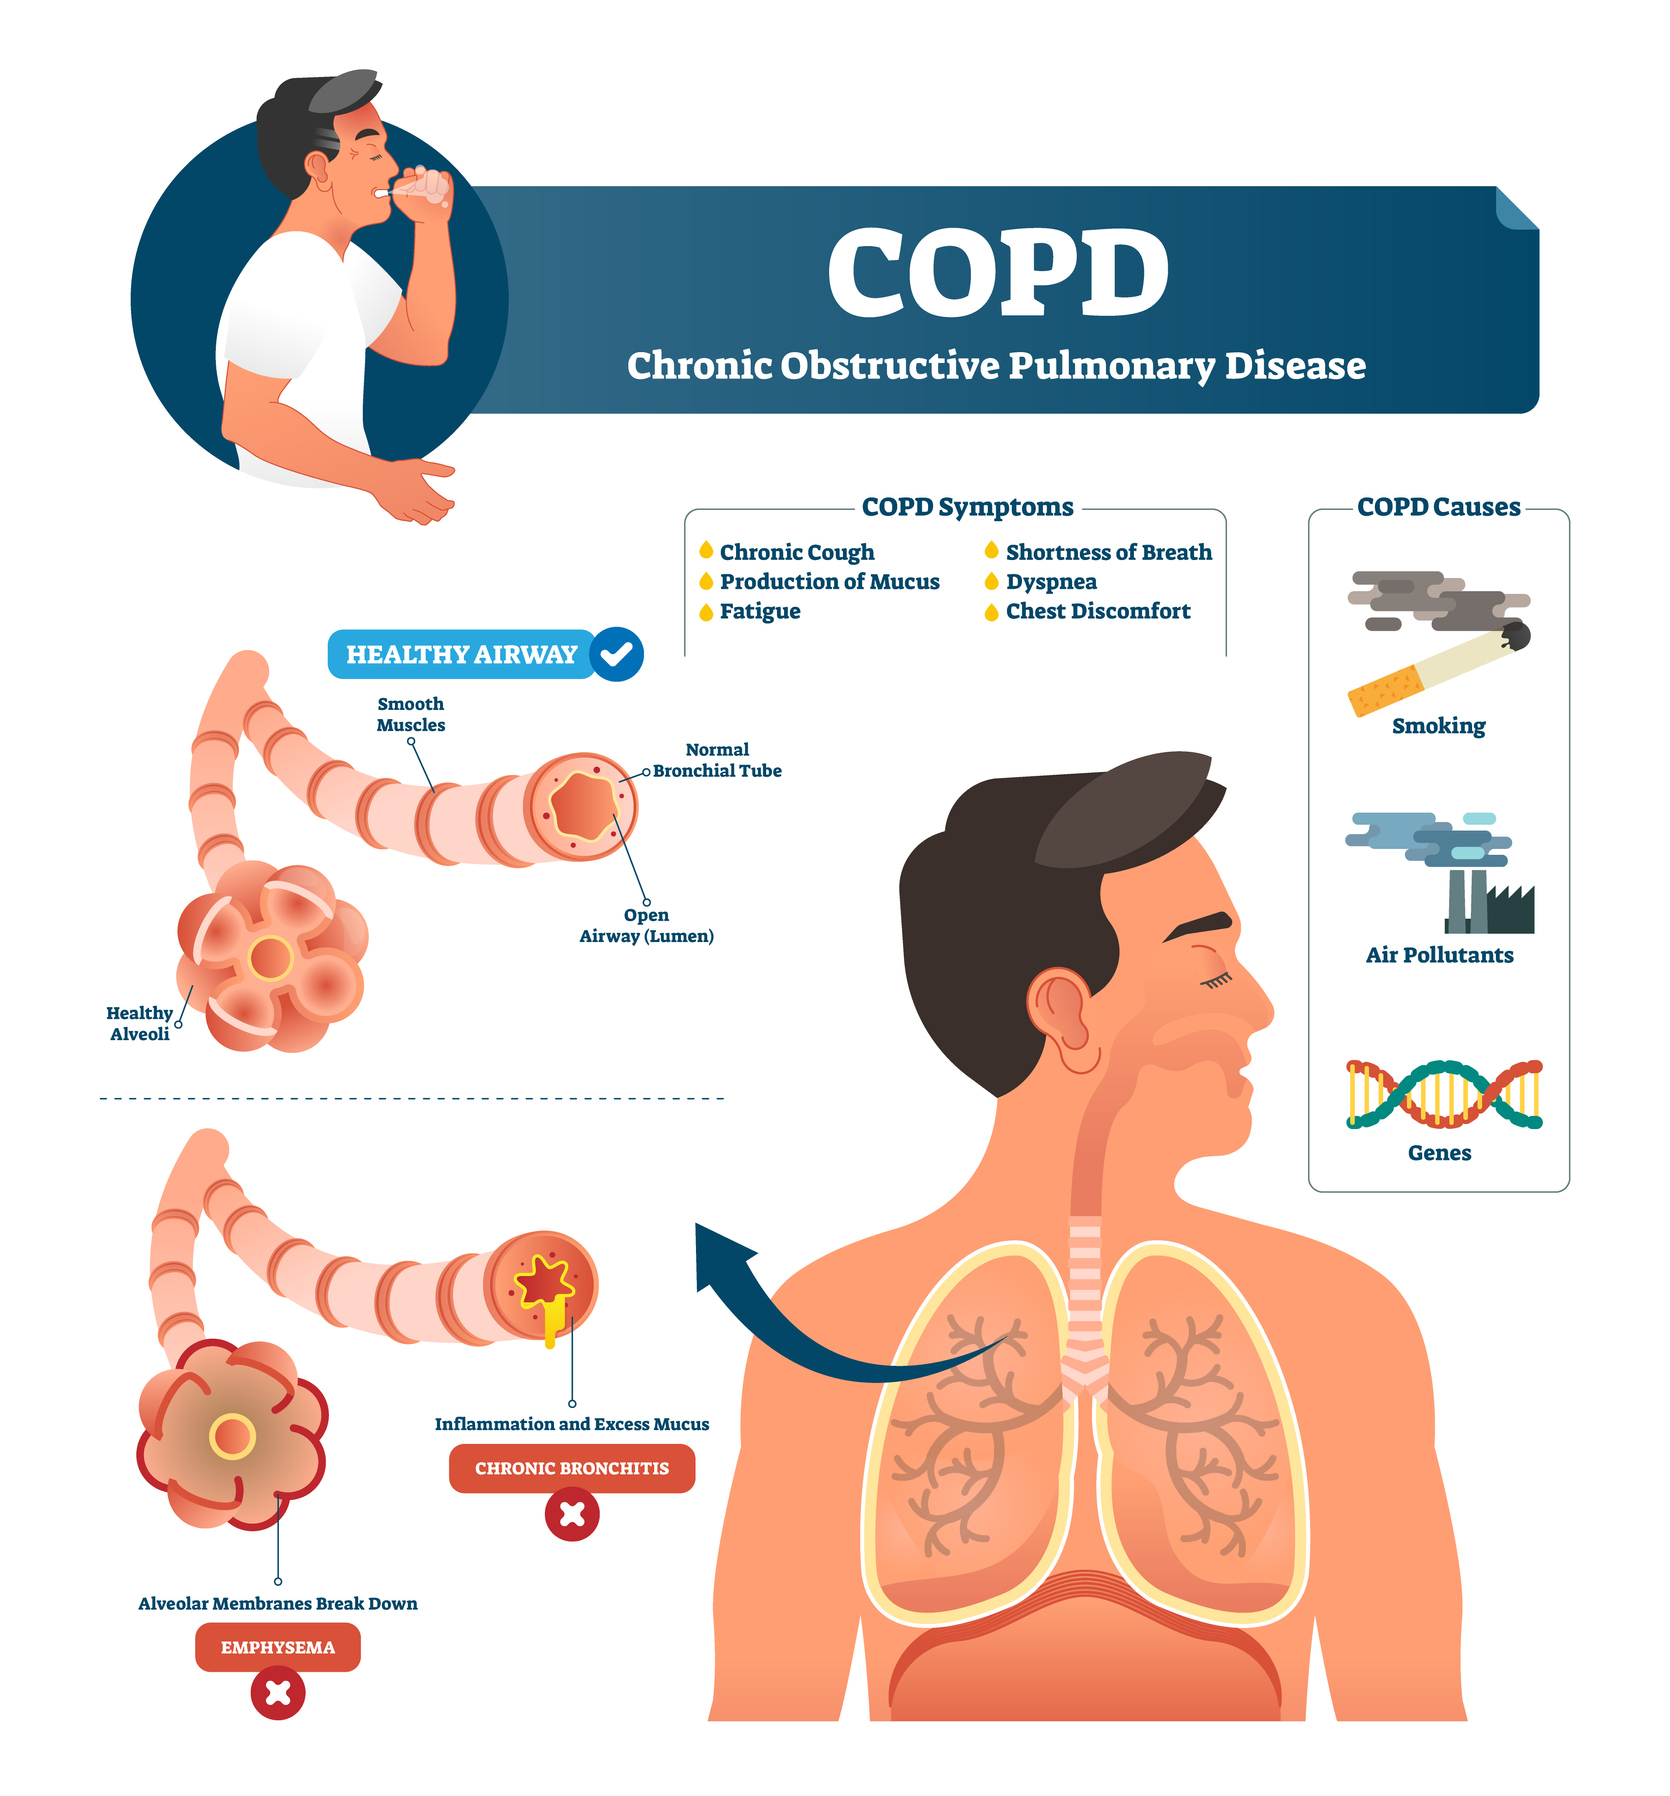 COPD symptoms and causes